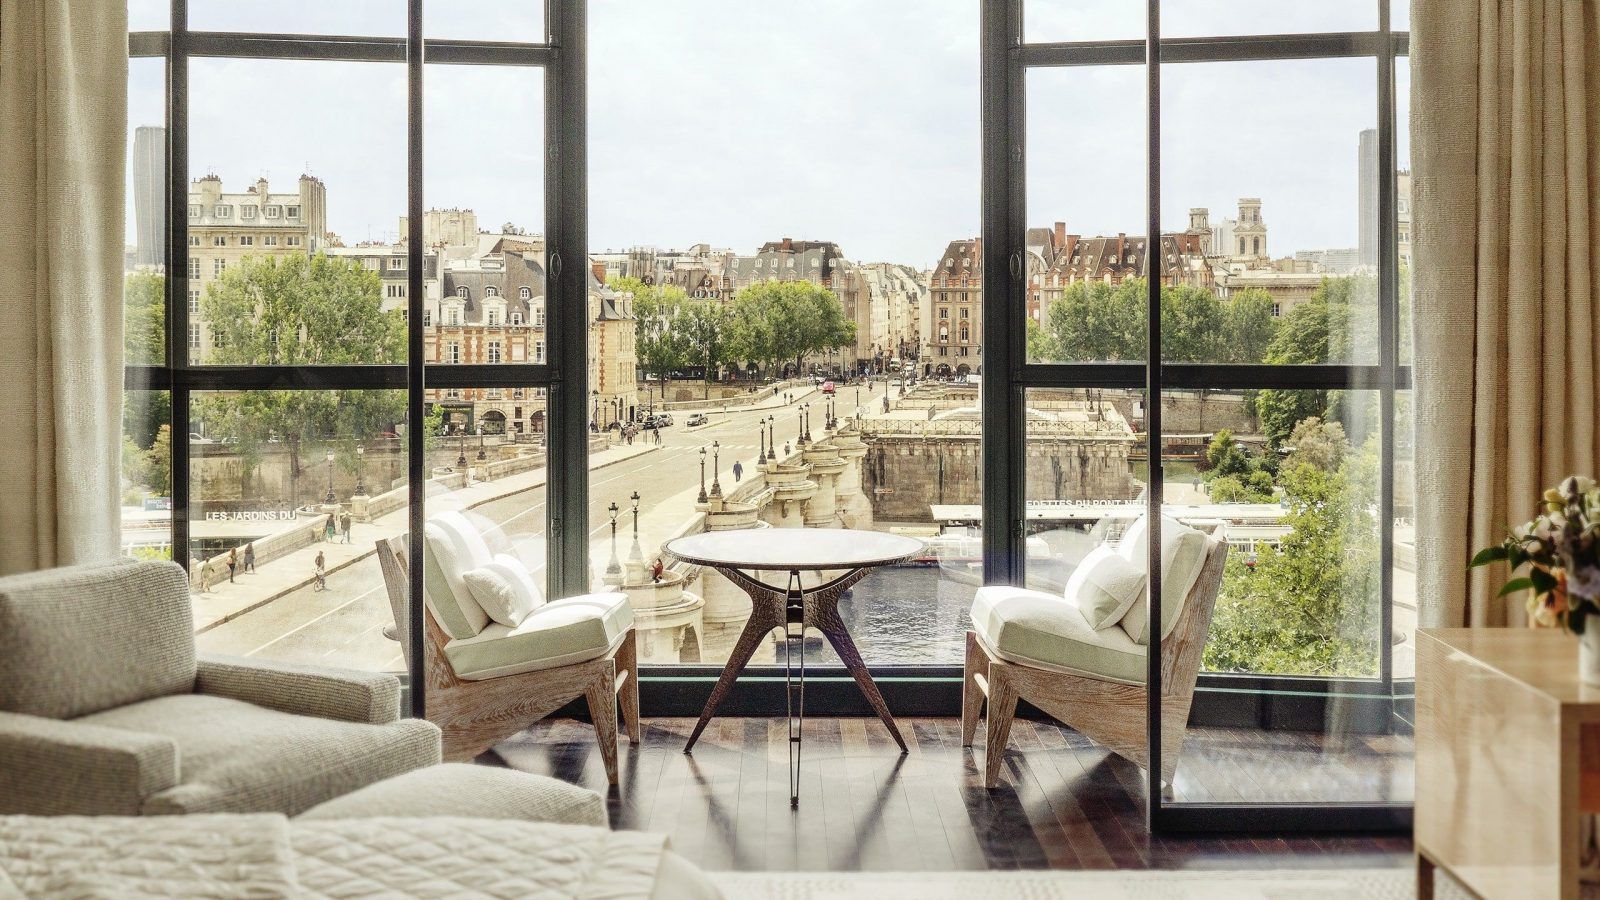 11 Most Exquisite and Romantic Hotels to Stay in Paris